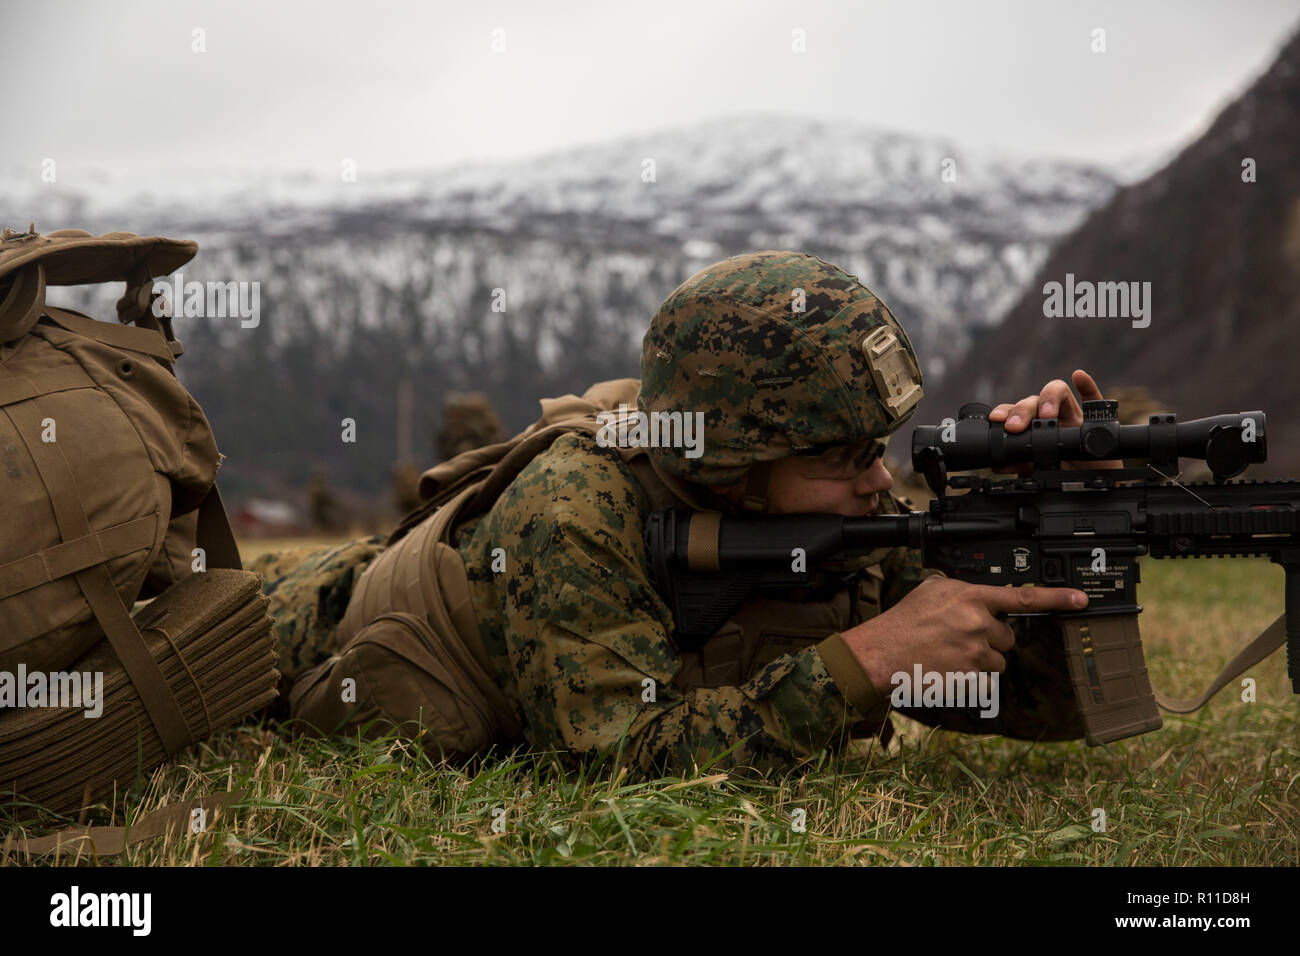 A U.S. Marine Corps holds a position during Exercise Trident Juncture 18 October 31, 2018 in Gjora, Norway. The multi-national exercise is the largest NATO exercise since 2015, and includes more than 50,000 military members from 31 countries. Stock Photo